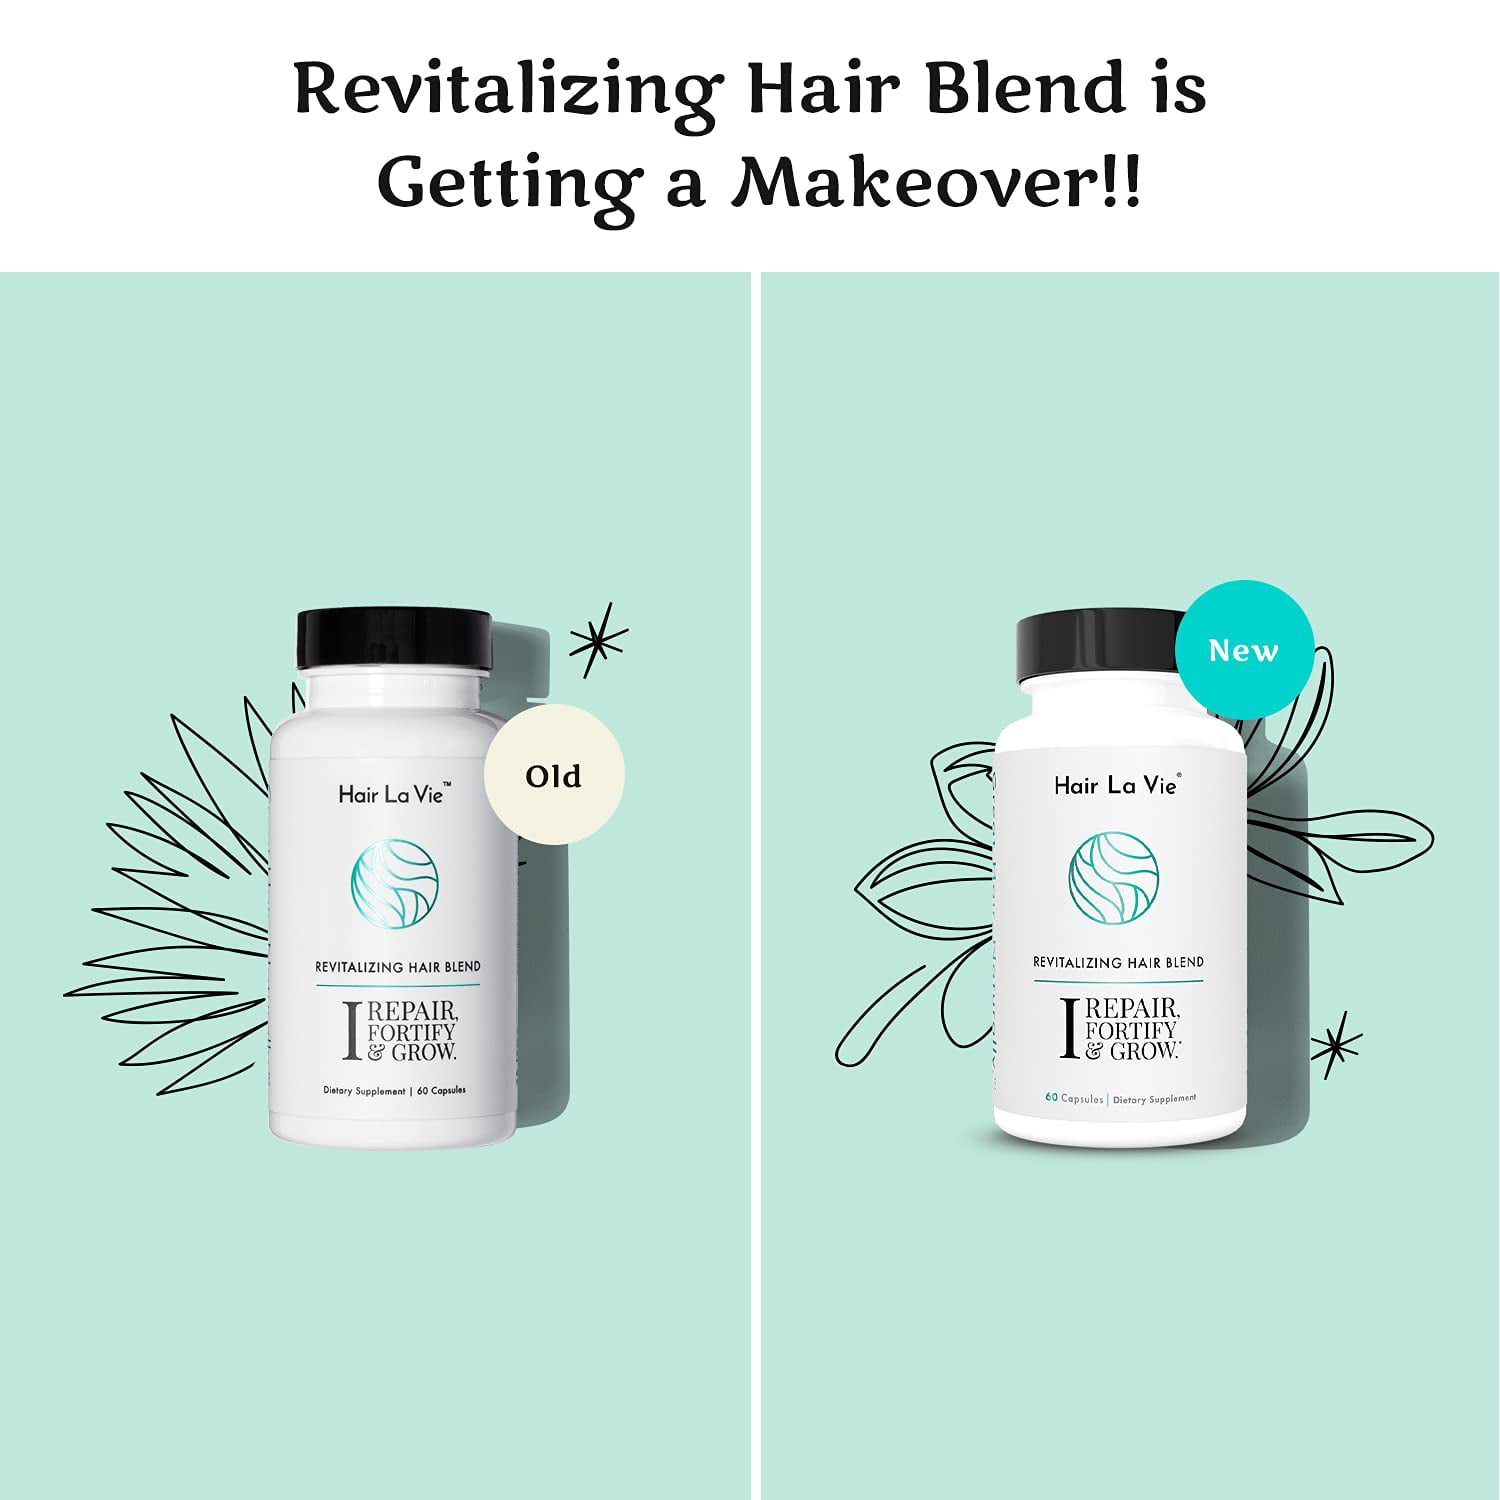 Hair La Vie Revitalizing Blend Hair Vitamins with Biotin, Collagen and Saw  Palmetto for Fast Hair Growth for Women and Men - Walmart.com